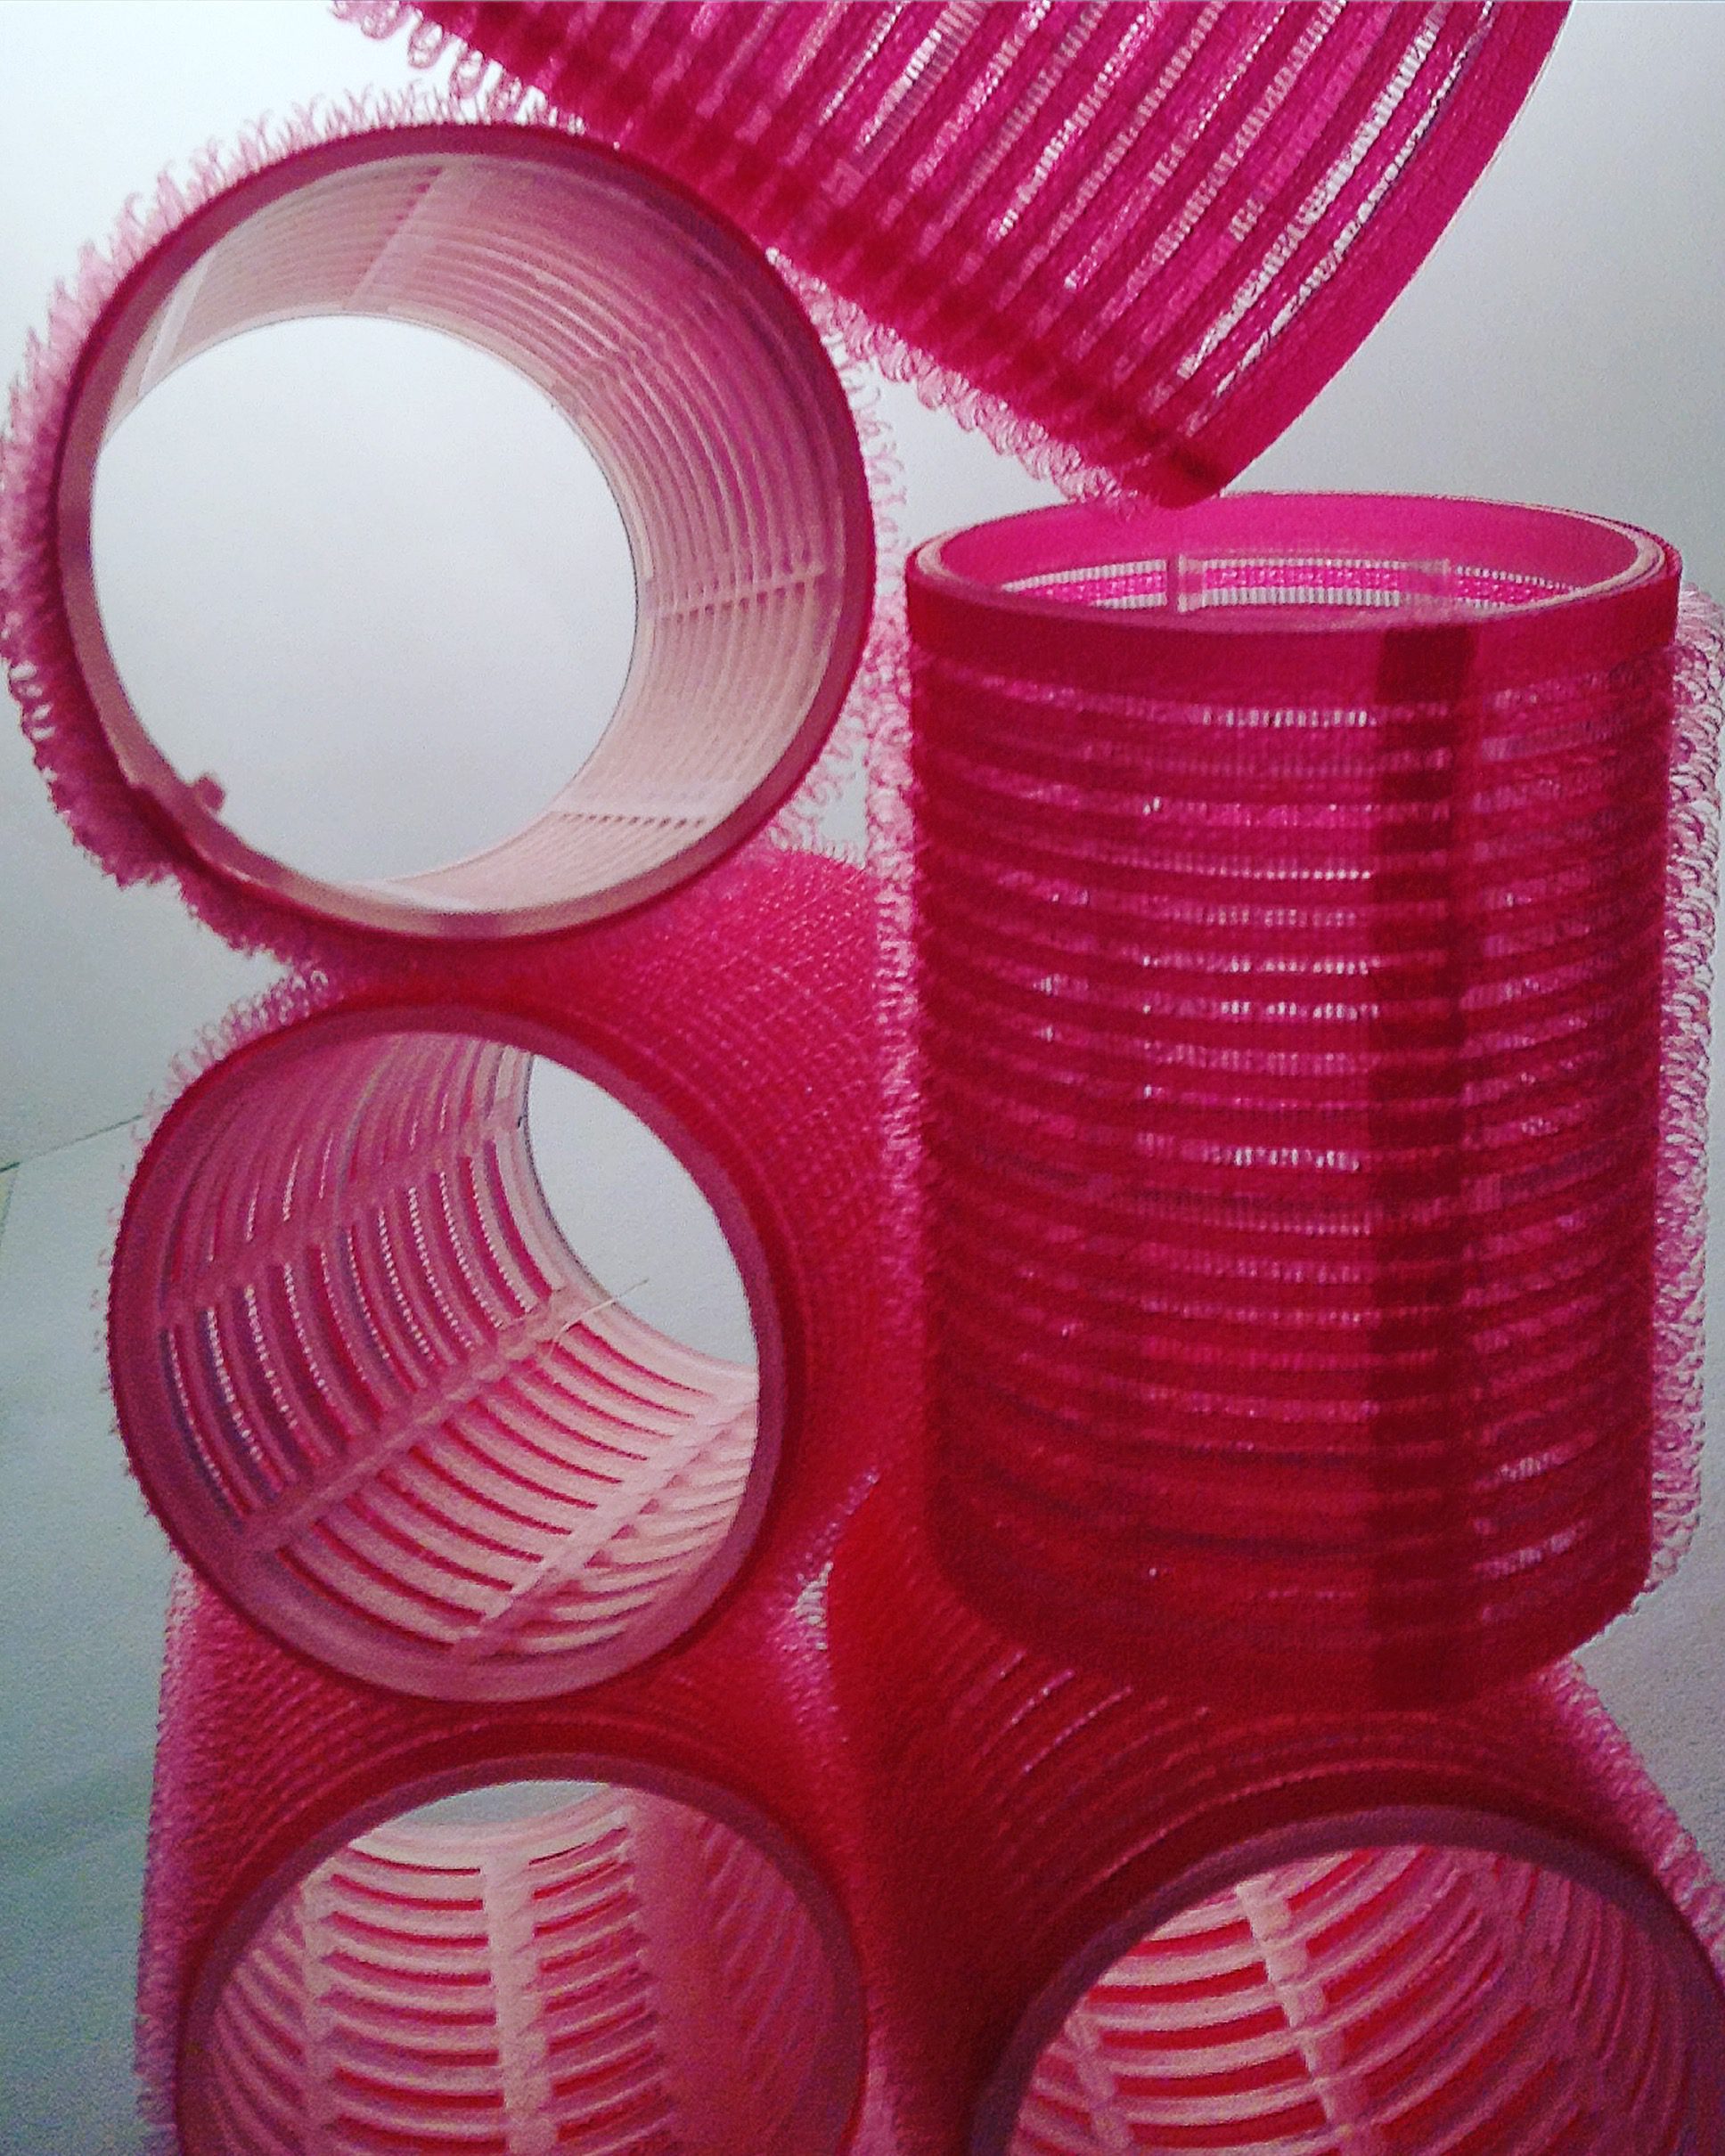 pink velcro rollers stacked